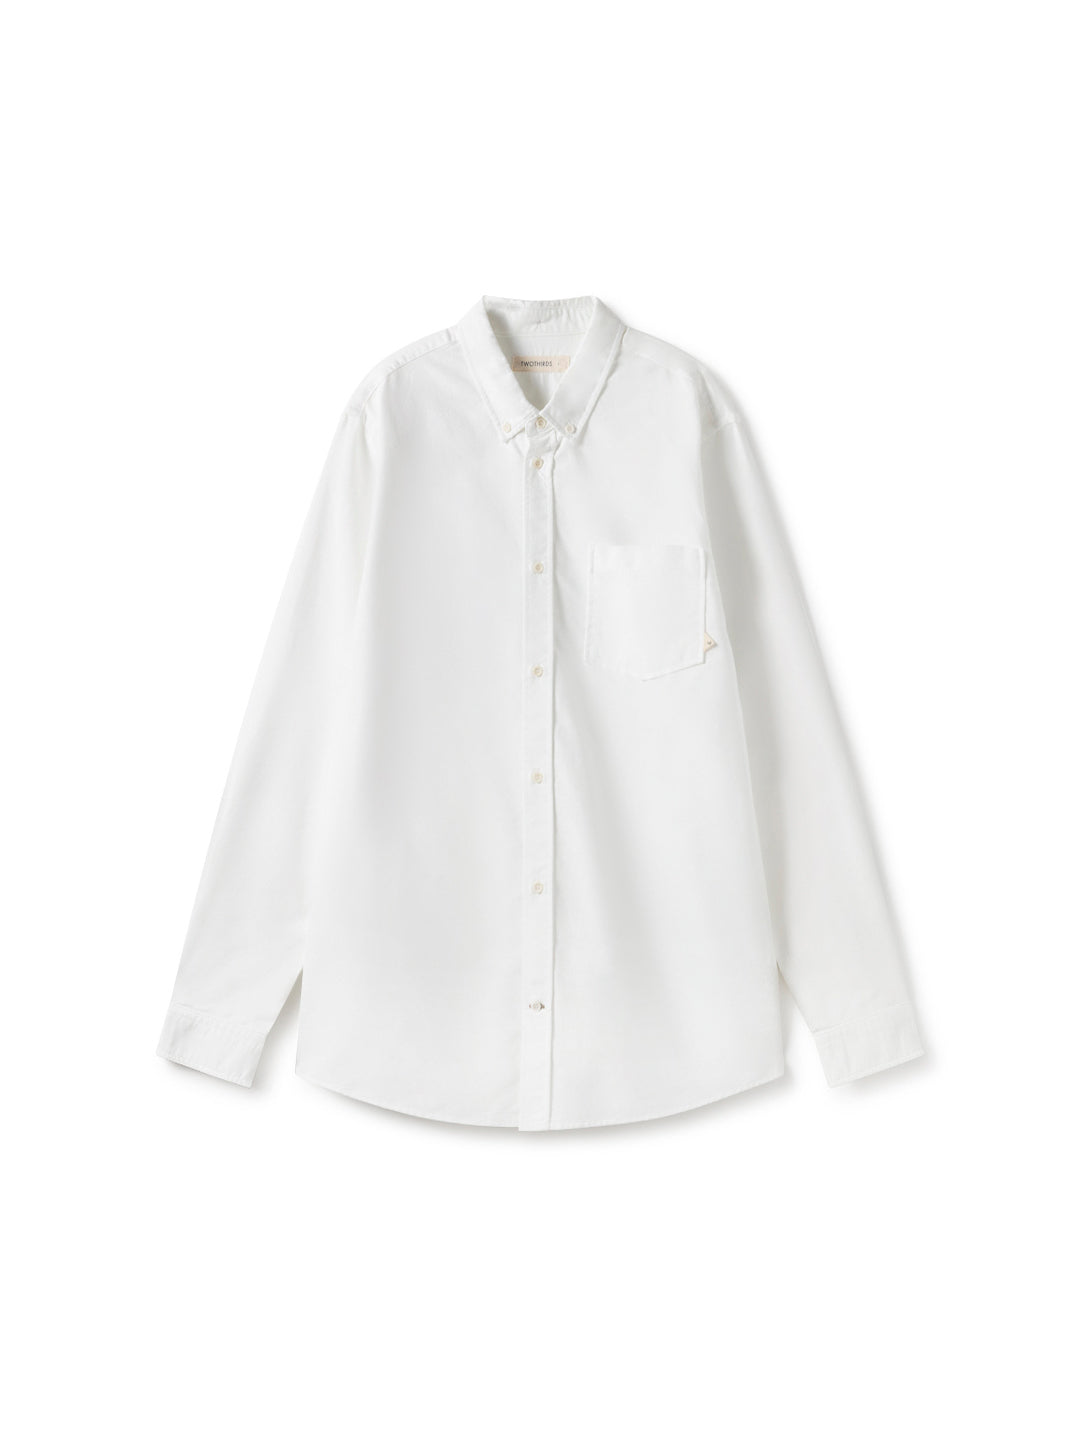 Admiralty - White | Fair Fashion by TWOTHIRDS